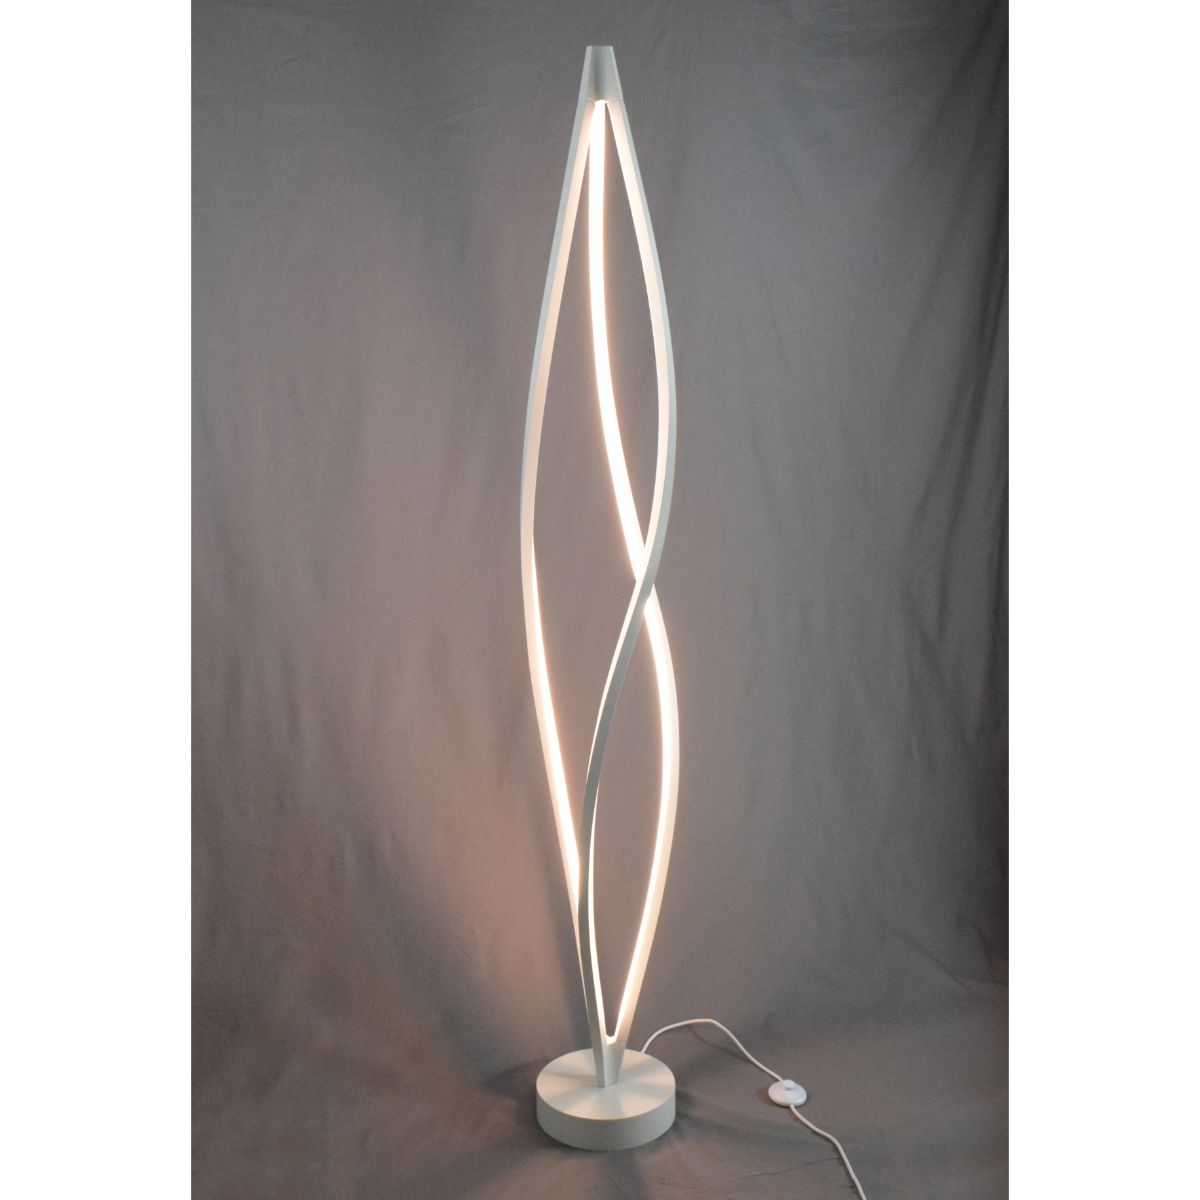 Cyclone 3 Lights LED Floor Lamp Twisted Aluminum Matte White Finish